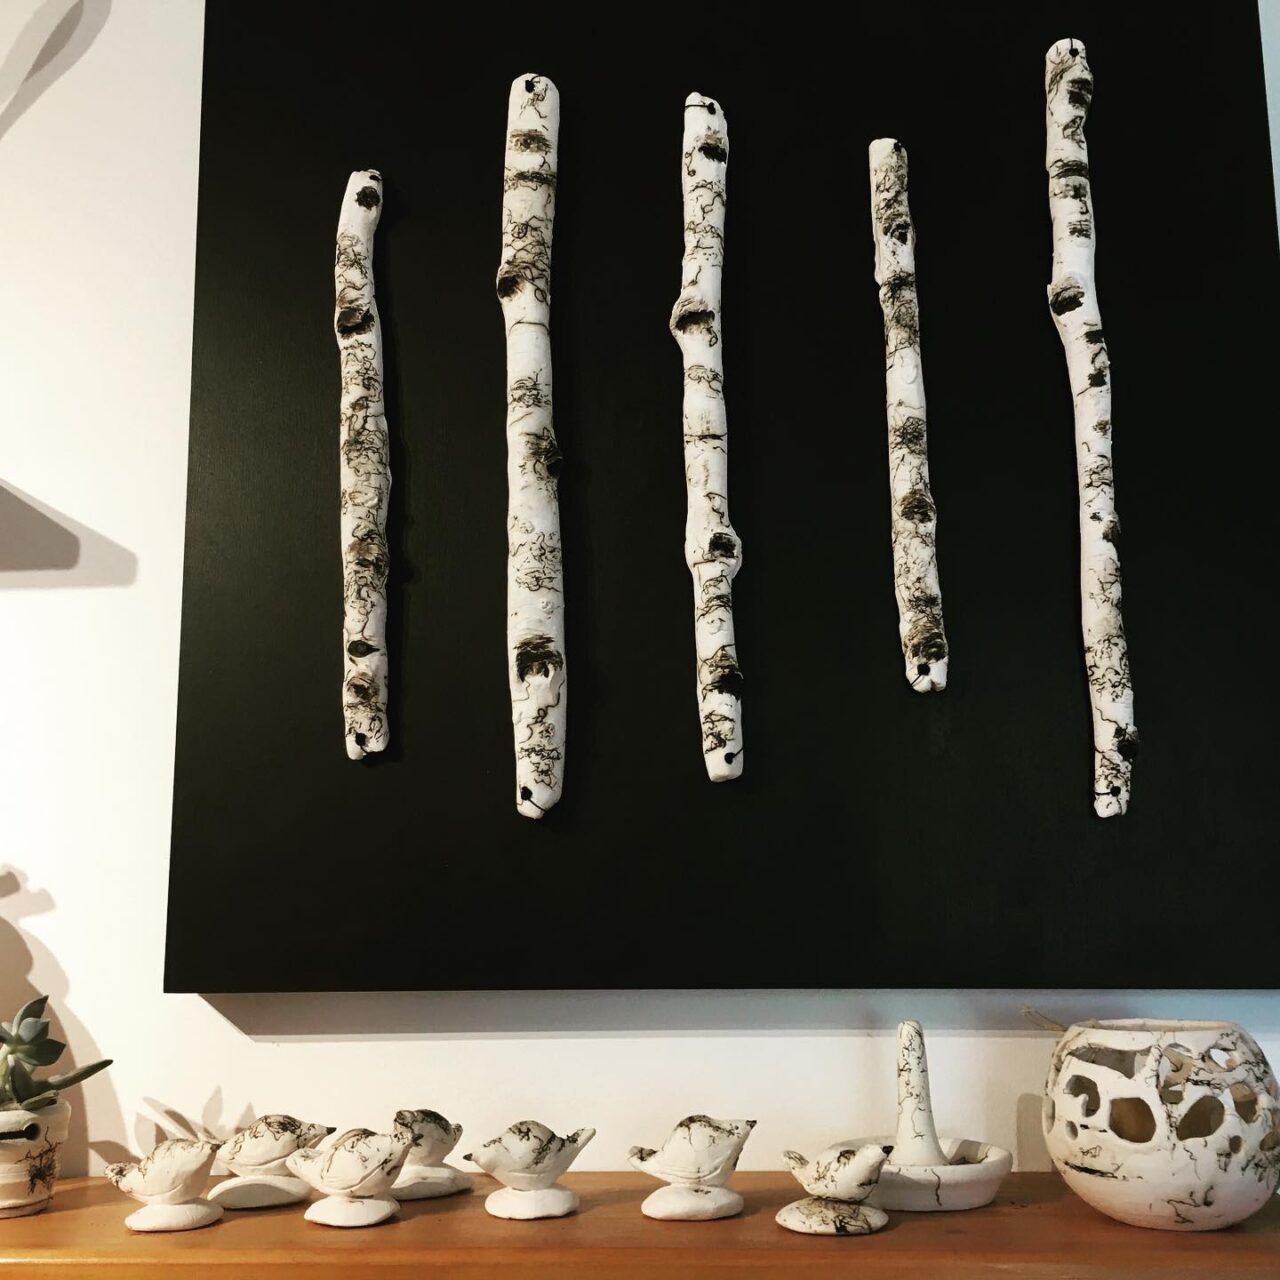 birch sticks on wall with pottery underneath